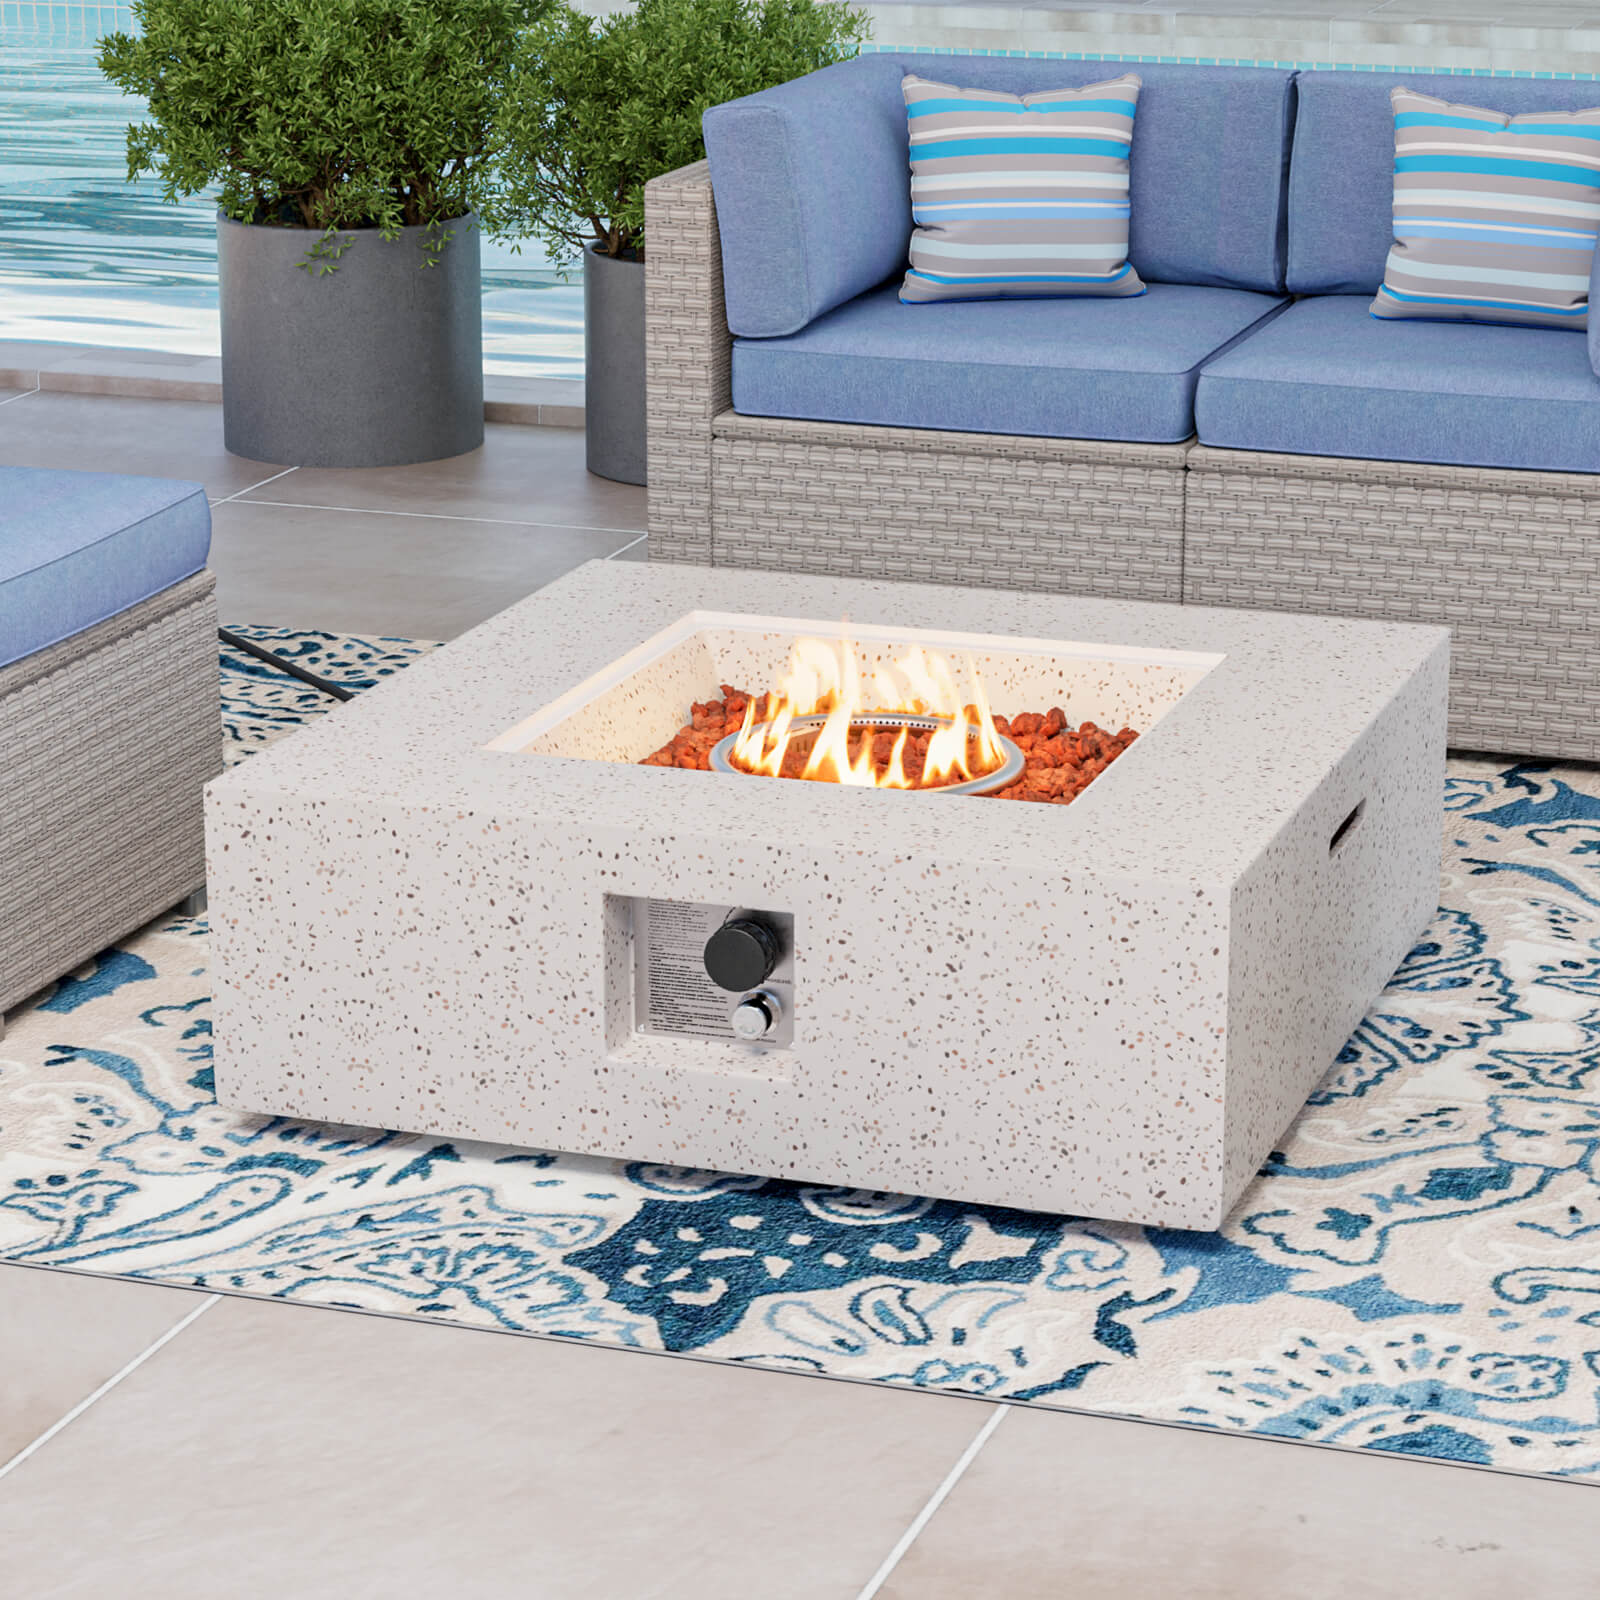 Sonder Square Outdoor Propane Fire Pit